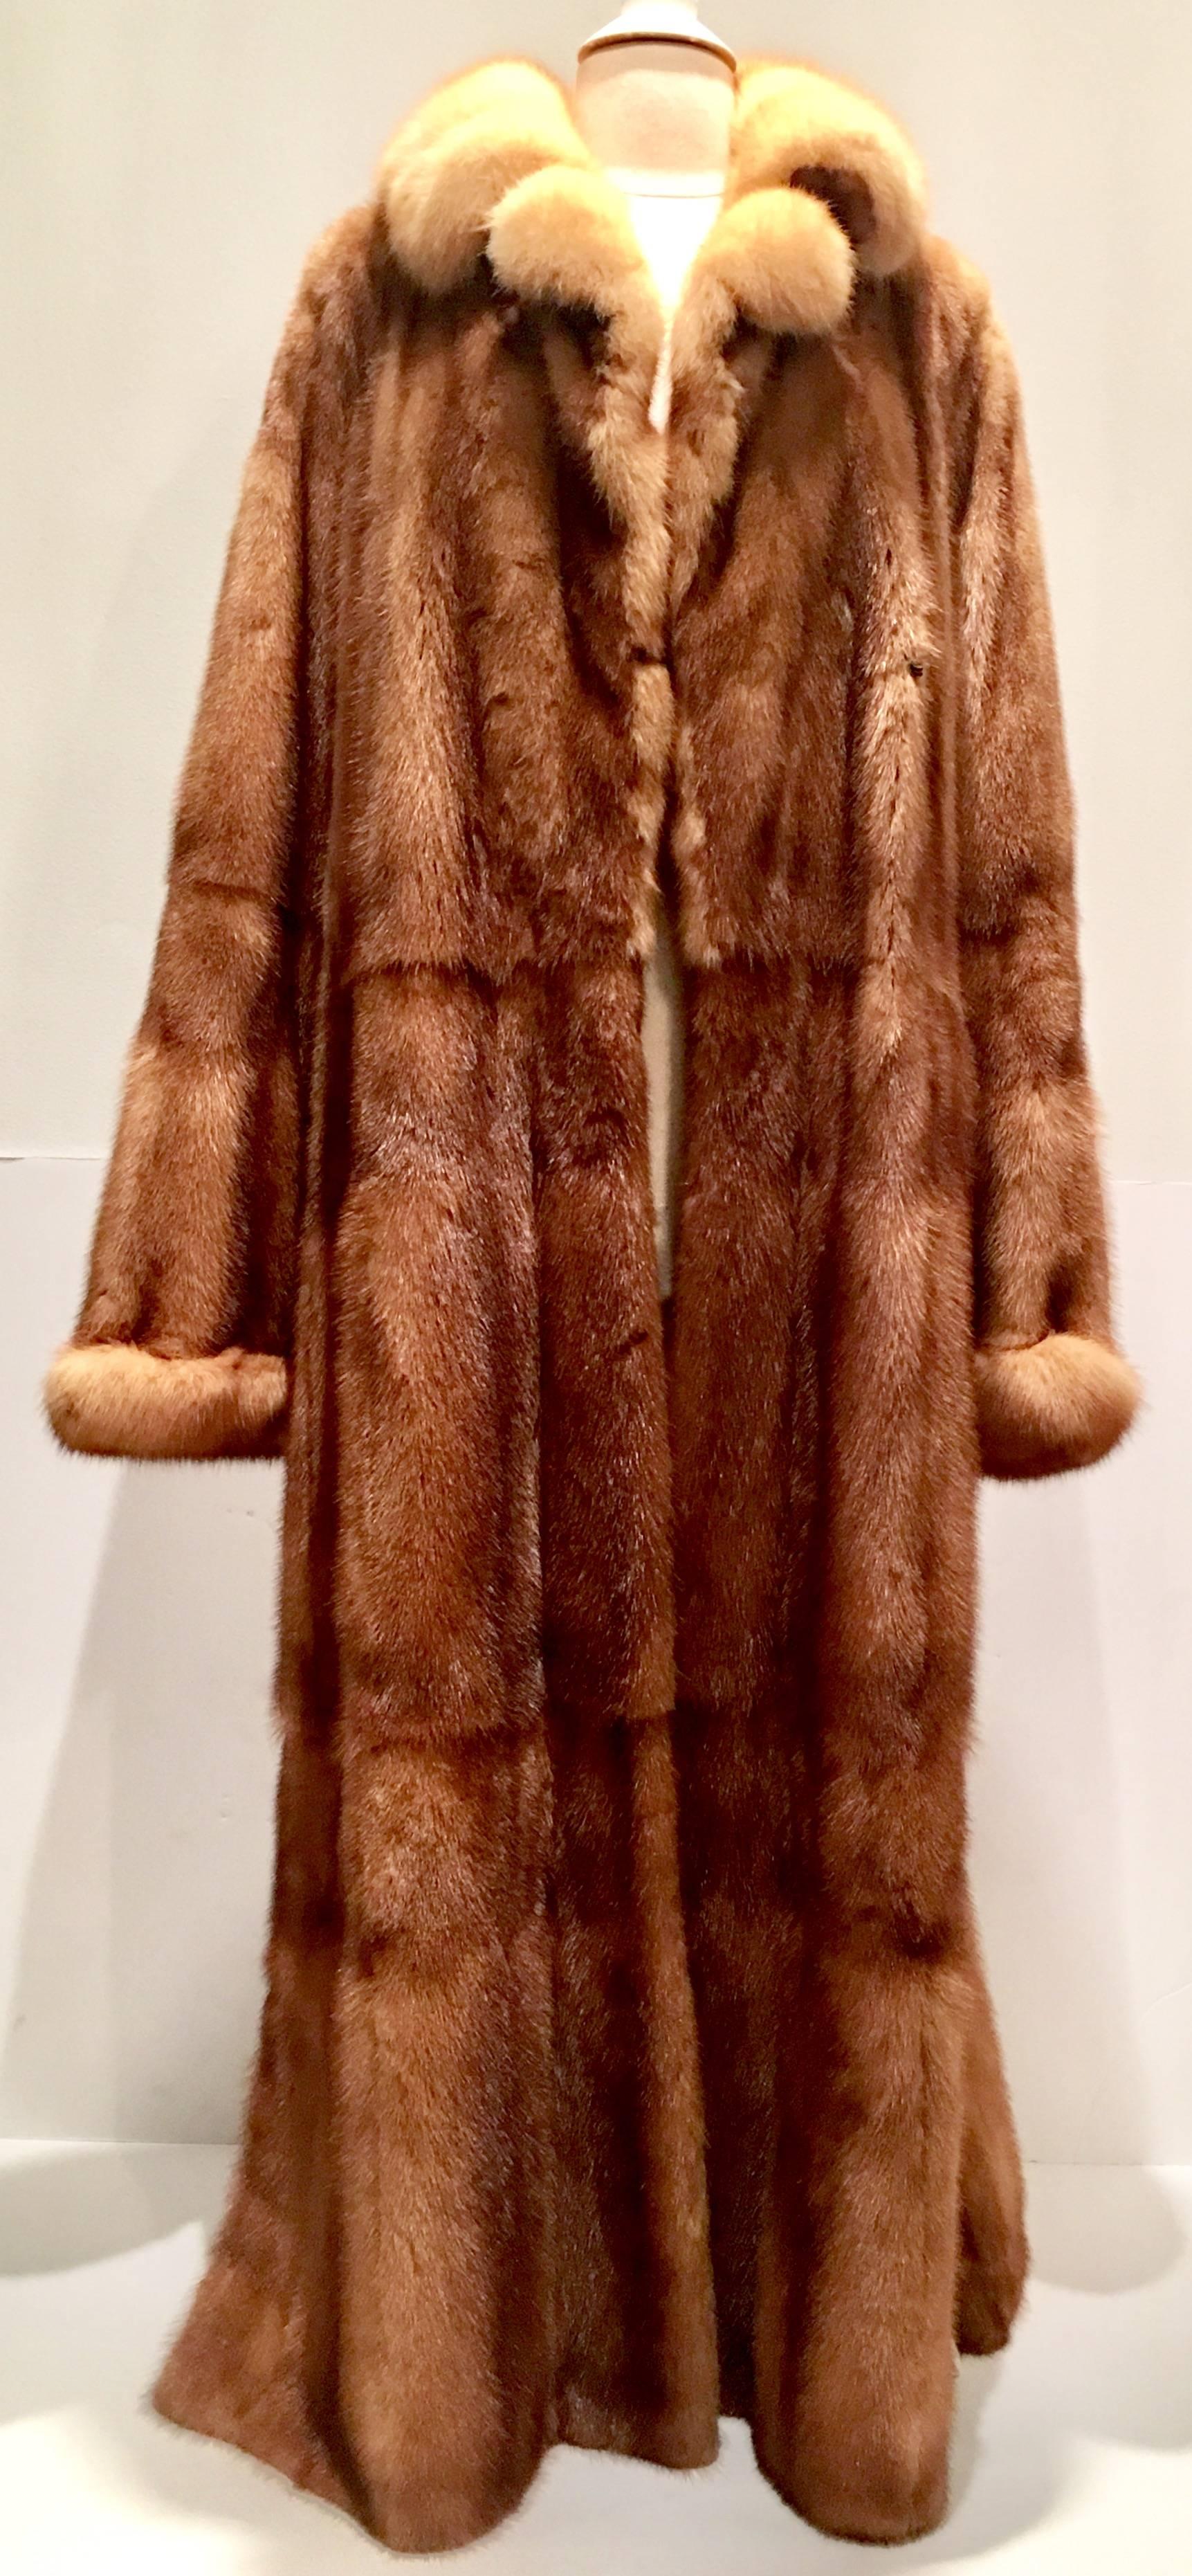 Incredible, Stunning and like new 21st Century Louis Feraud Paris full length whiskey dyed mink coat. Only Louis Feraud knows how to fabricate a coat at this level, of the highest quality, travels well and is lightweight yet as comfortable and